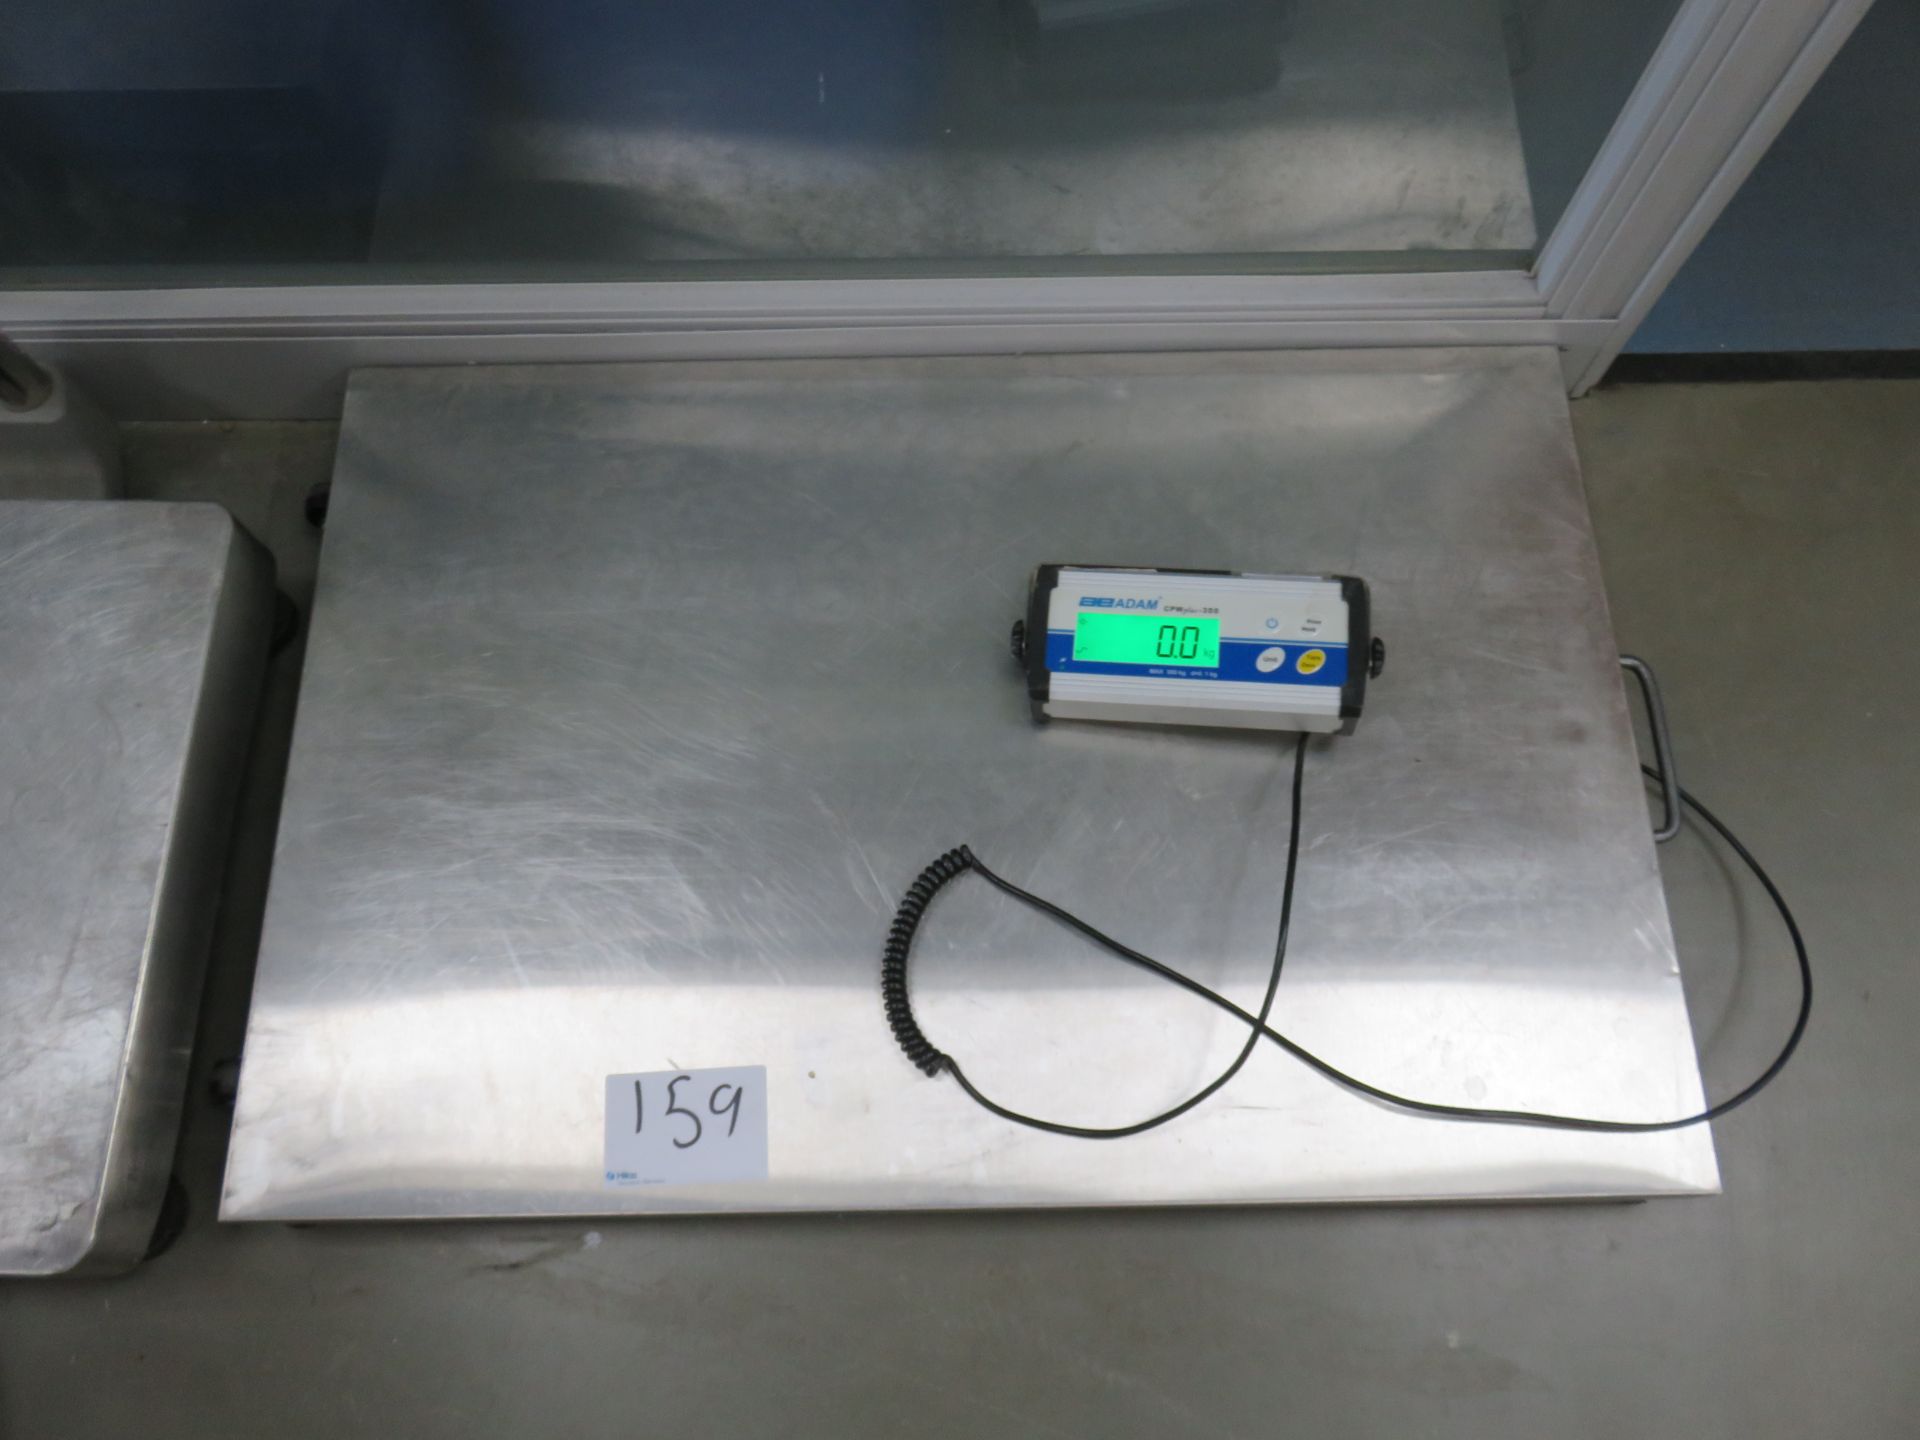 Stainless Steel Mobile Platform Scale with AE Adam CPW Plus-300 Digital Readour Serial No. AE6370433